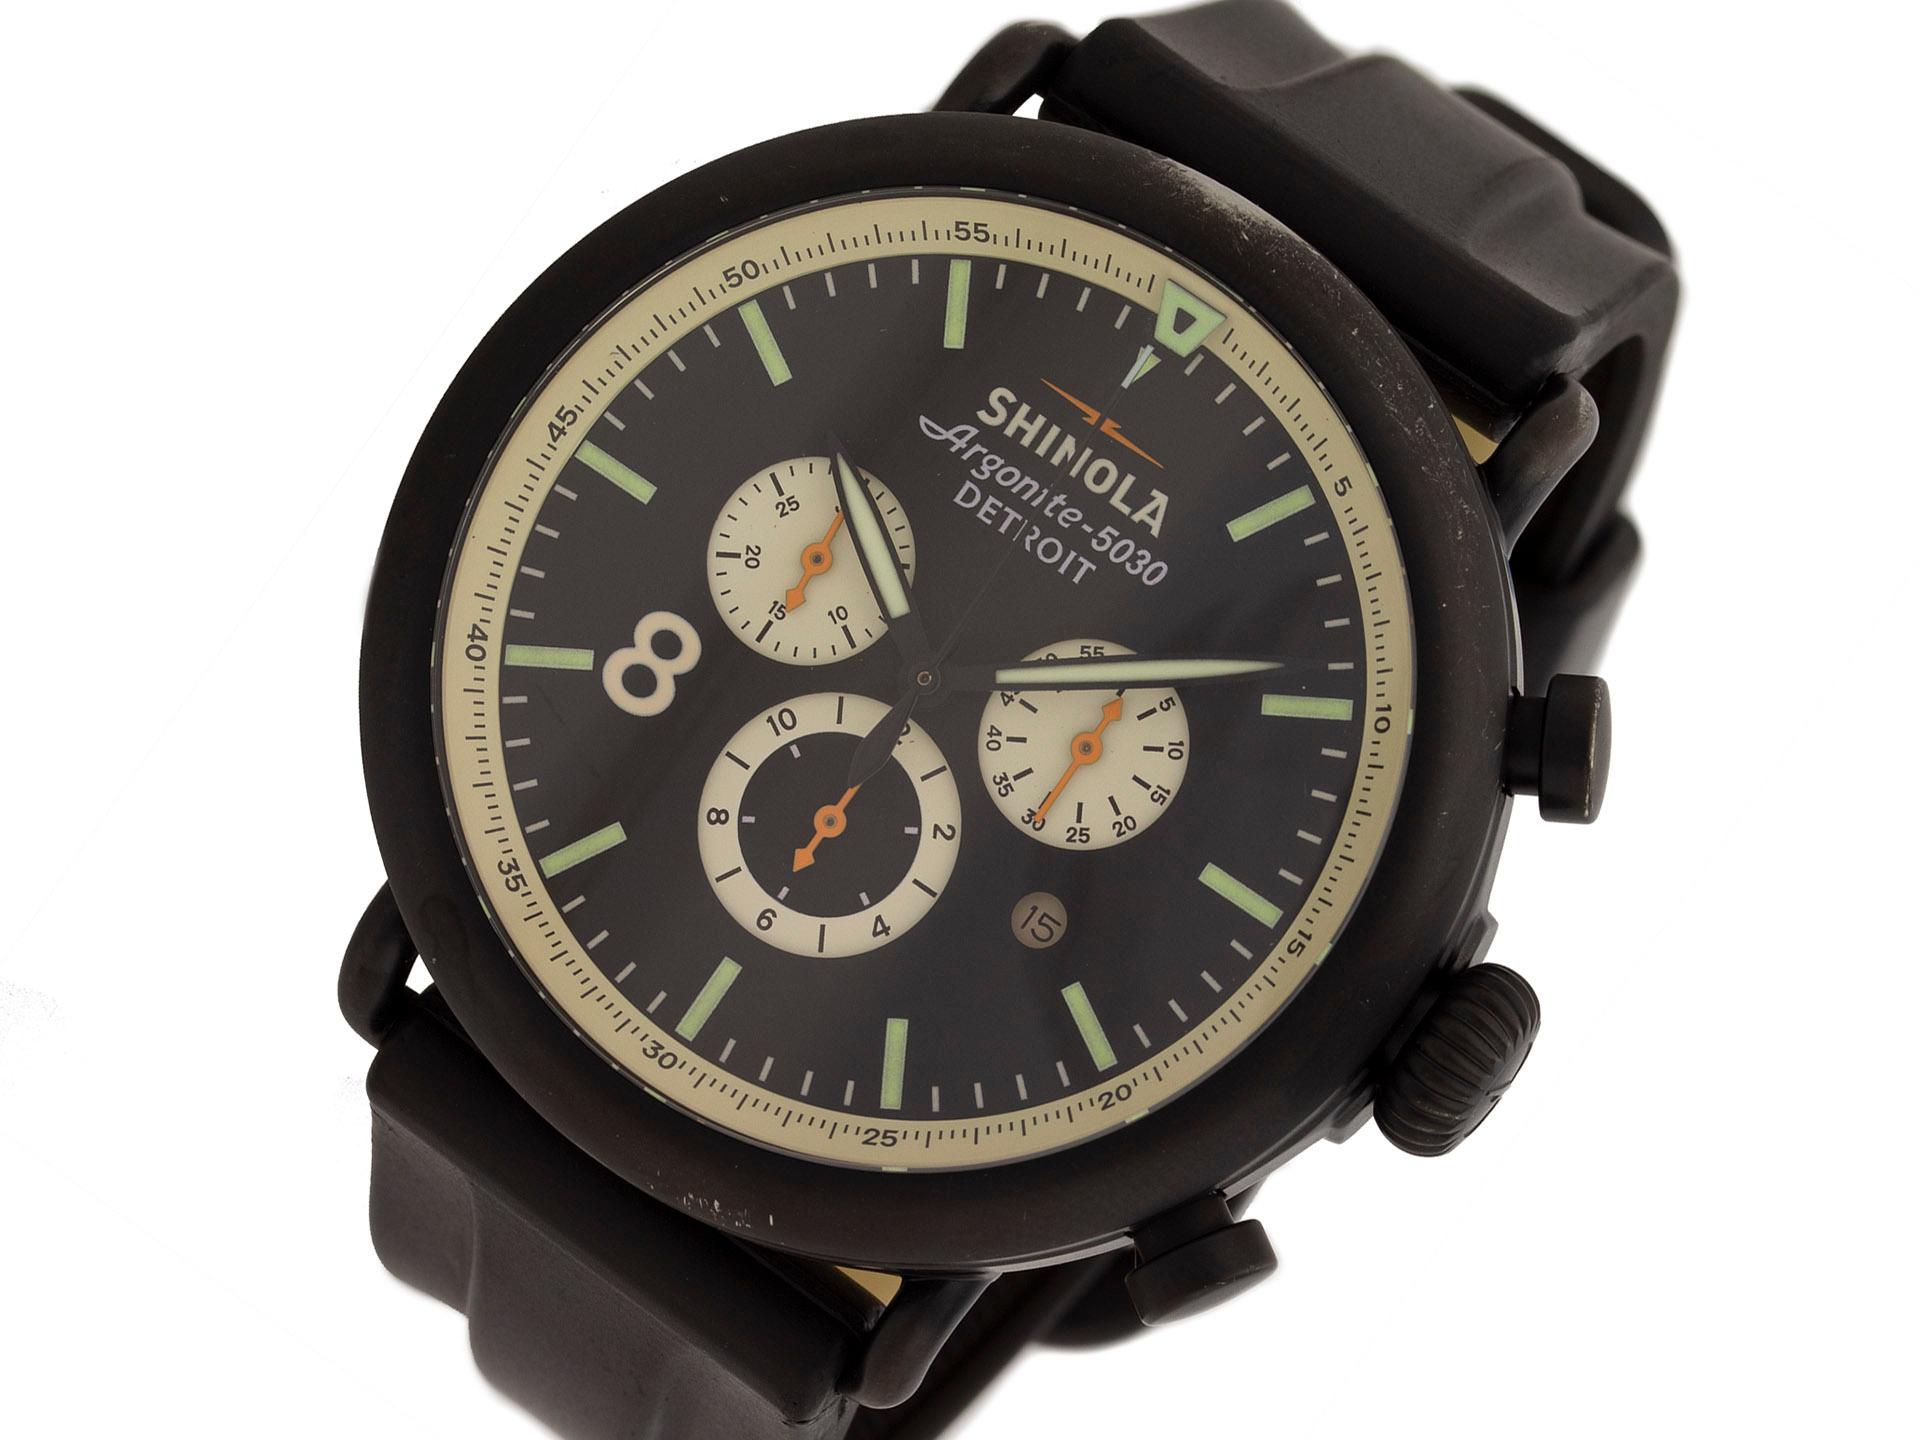 Black PVD Steel Shinola The Runwell Contrast Chrono Quartz Watch with a 47mm Case, Black Dial, and Rubber Strap with Tang Buckle. Features include Hours, Minutes, Seconds, Date, and Chronograph. Comes with a Deluxe Gift Box and 2 Year Precision